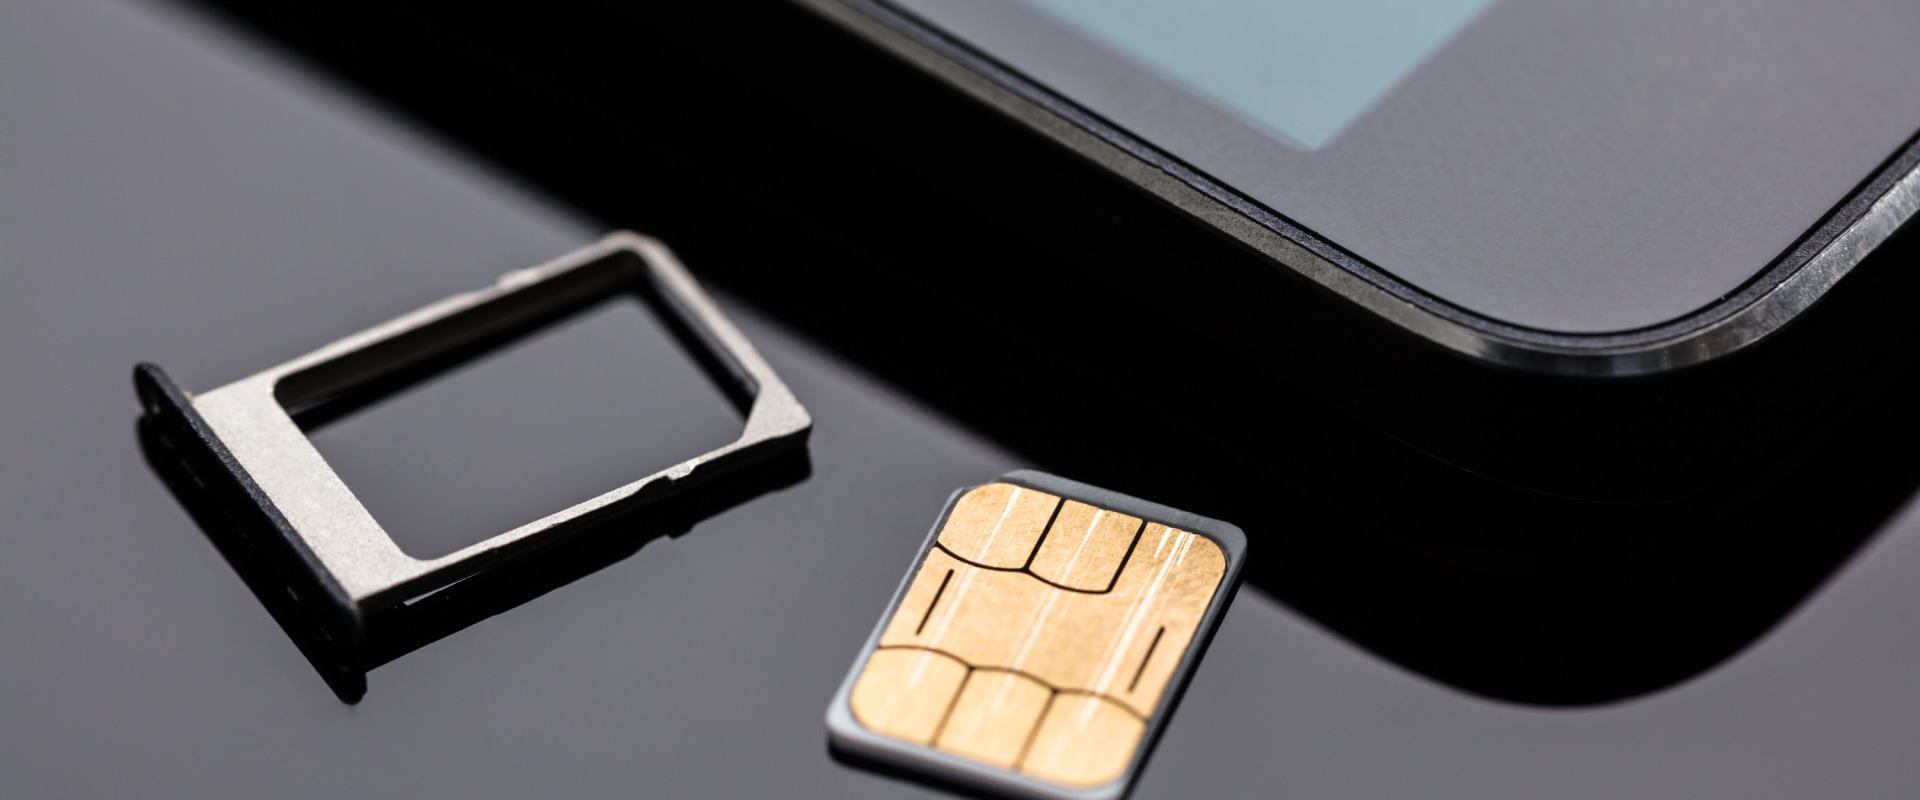 inserting-sim-card-in-android-phone-a-comprehensive-guide